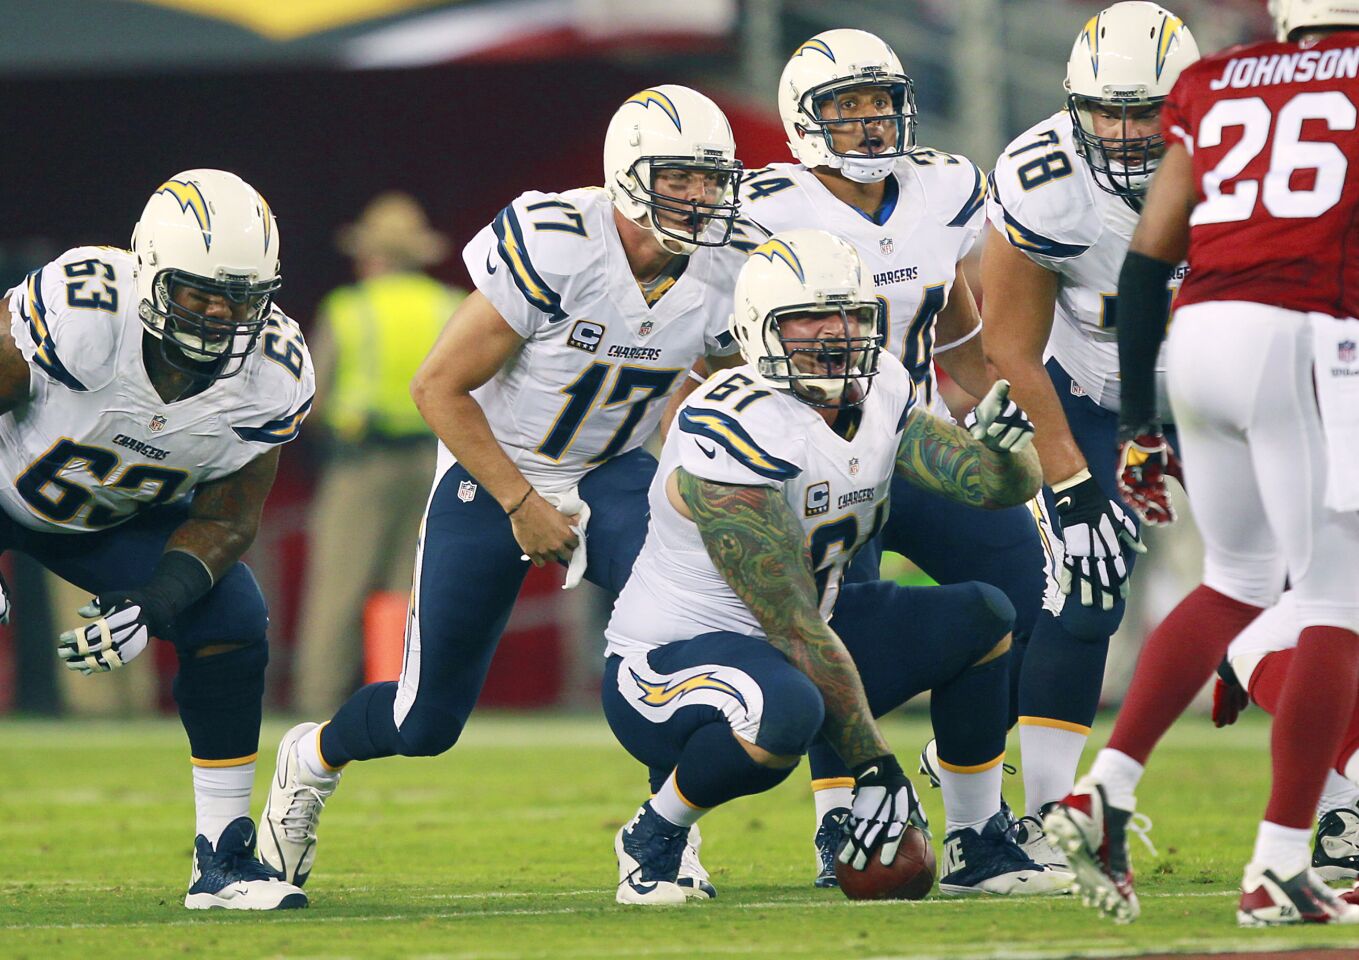 Chargers Philip Rivers calls a play against the Cardinals in Glendale on Sept. 8, 2014.